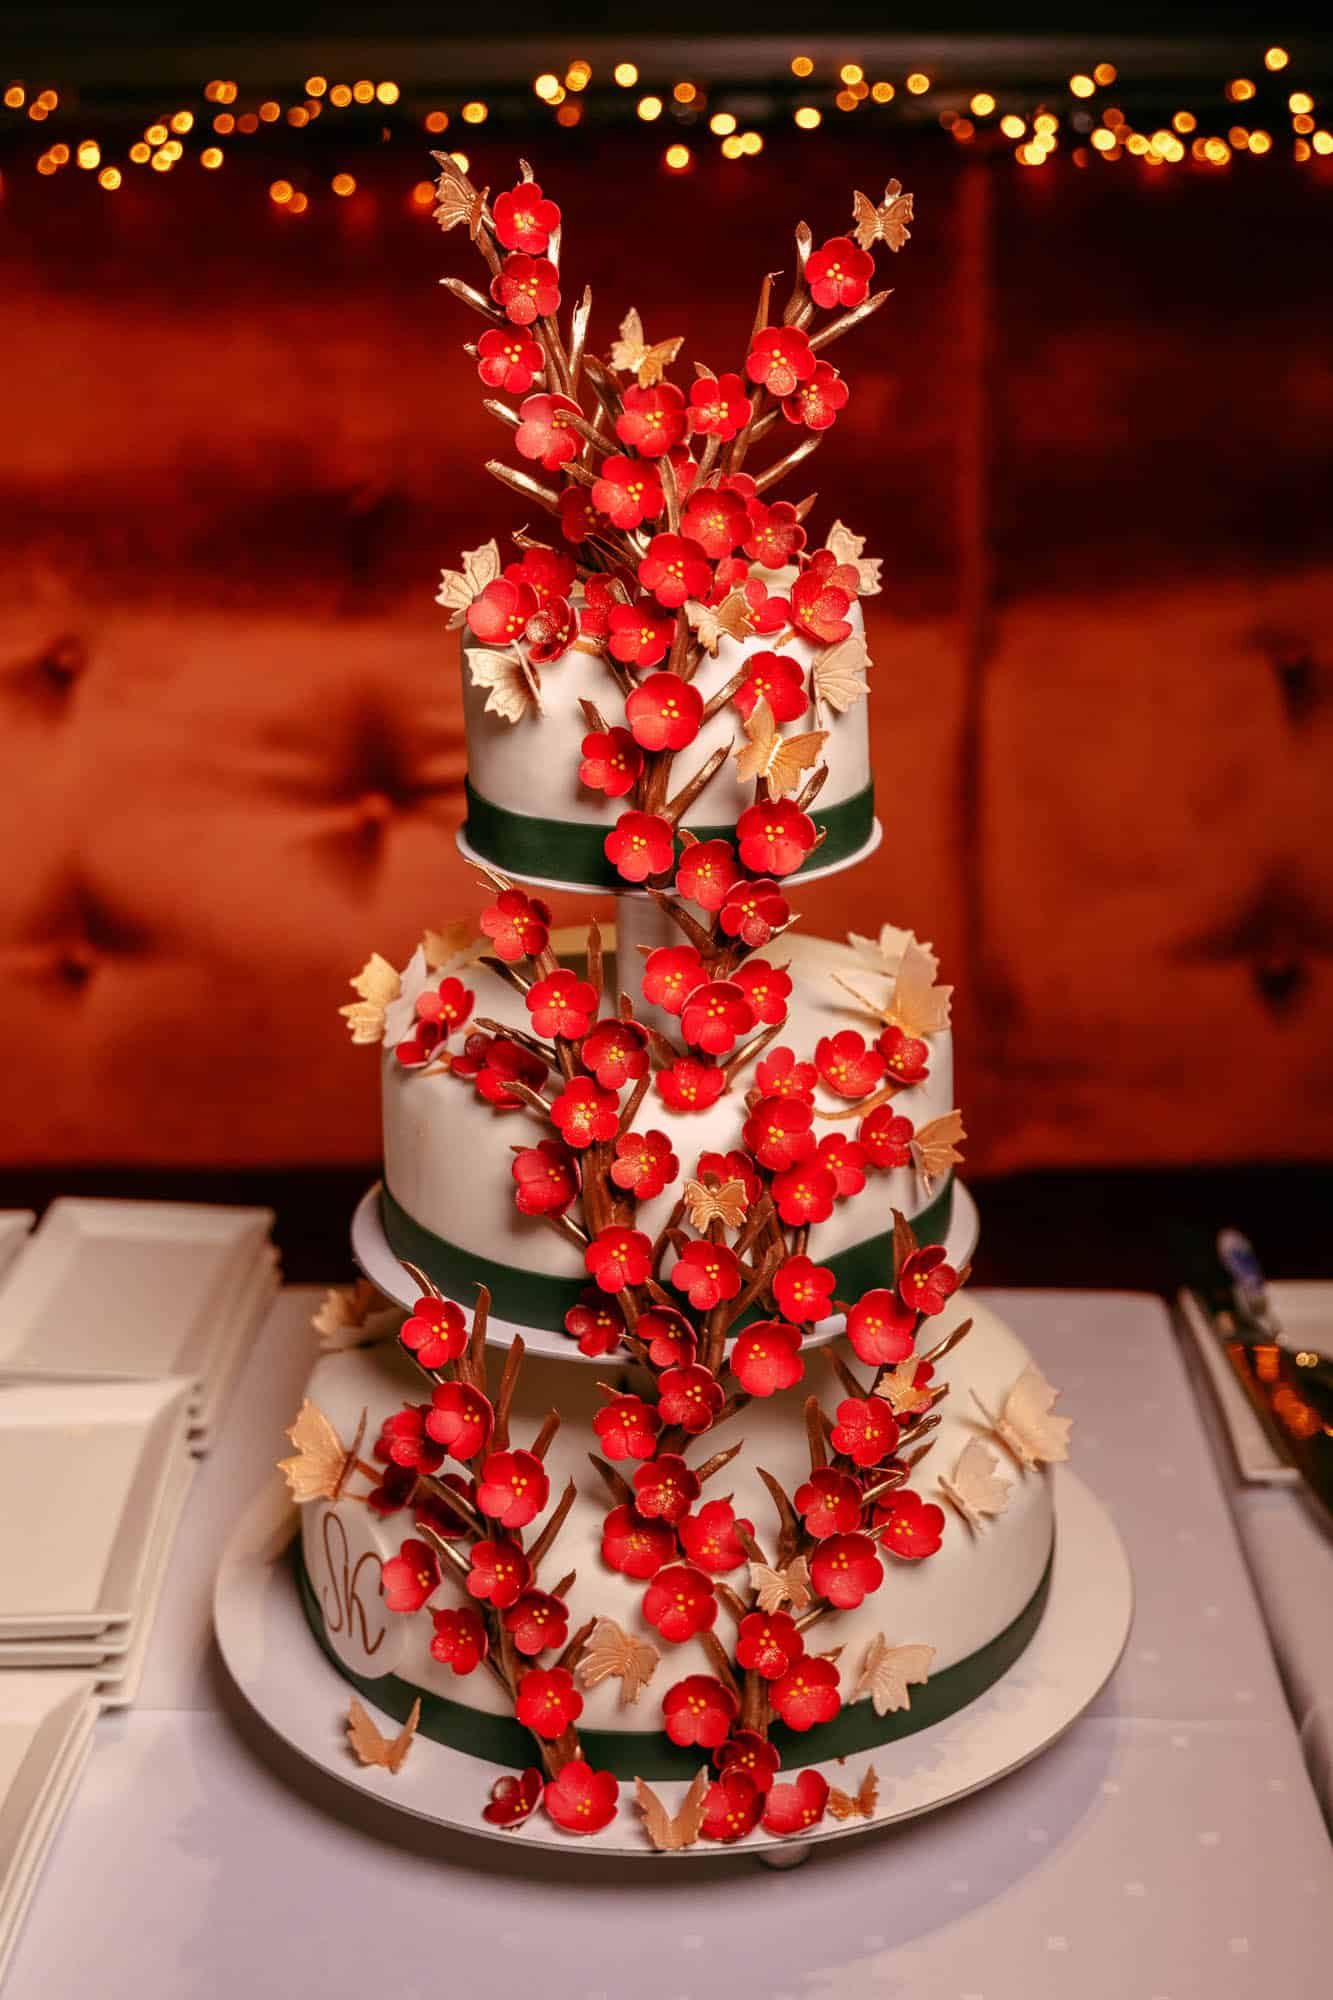 A wedding cake with red flowers on top.